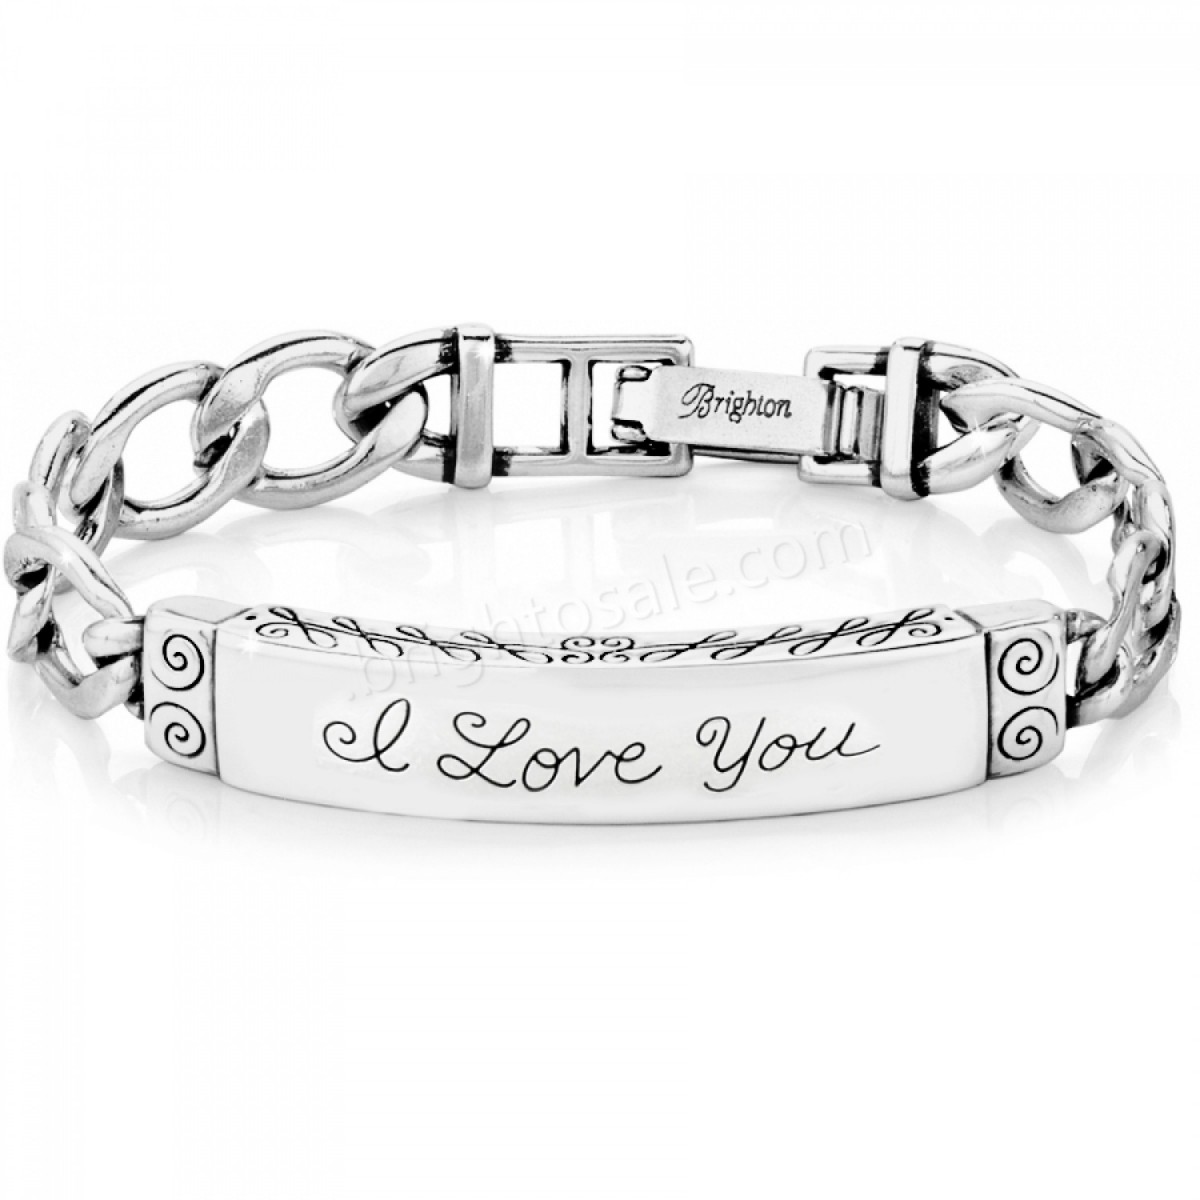 Brighton Collectibles & Online Discount I Love You ID Bracelet - -0